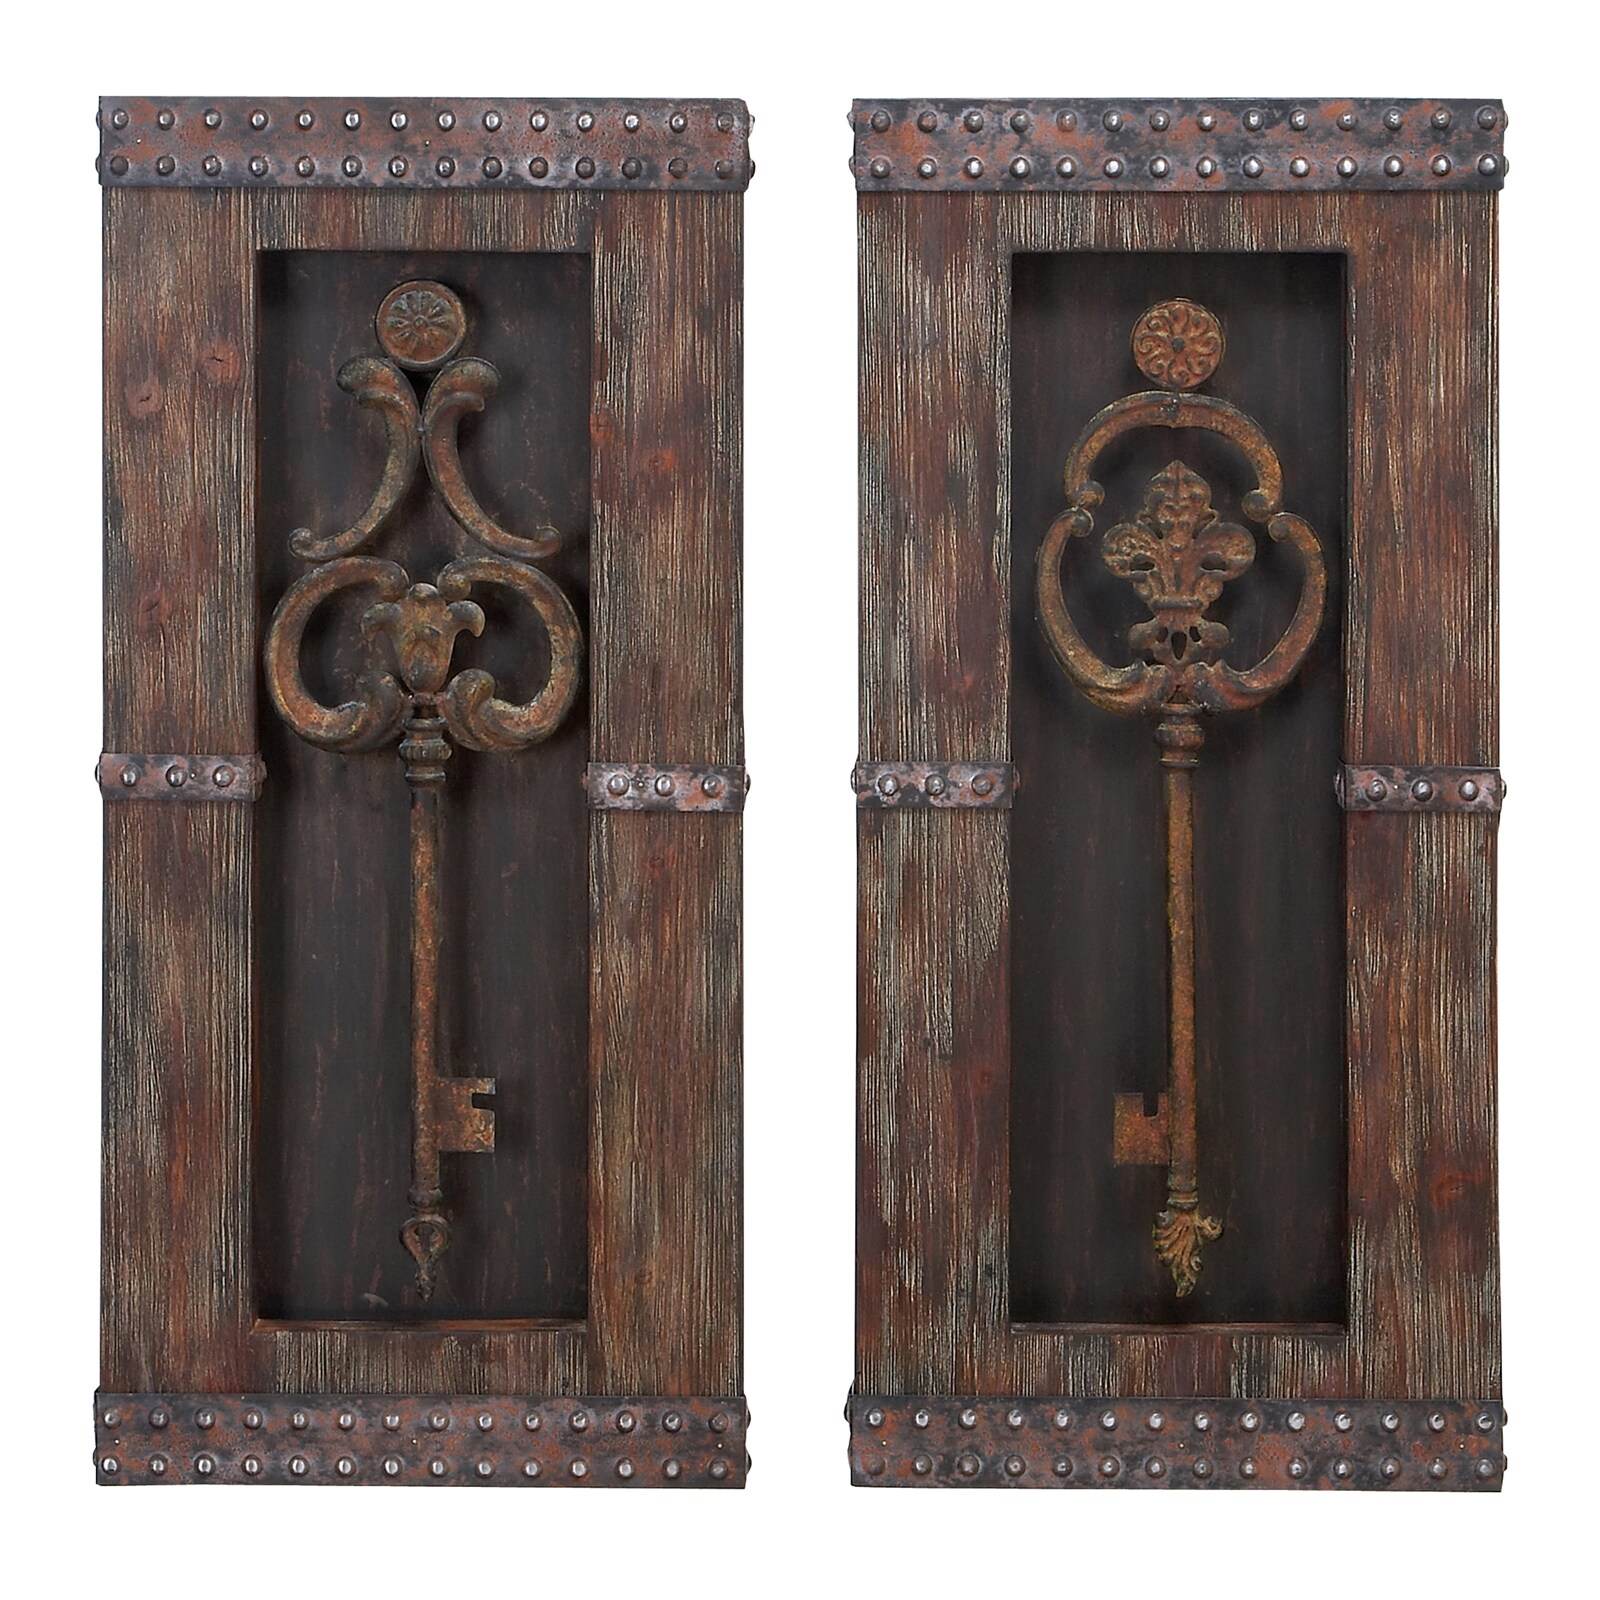 Casa Cortes Vintage Metal Keys 2 piece Wall Art Decor Set (Metal and woodDimensions 30 inches high x 1.5 inches wide x 14 inches long per panelEach panel features a different key designDisplay them individually or as a groupImported)